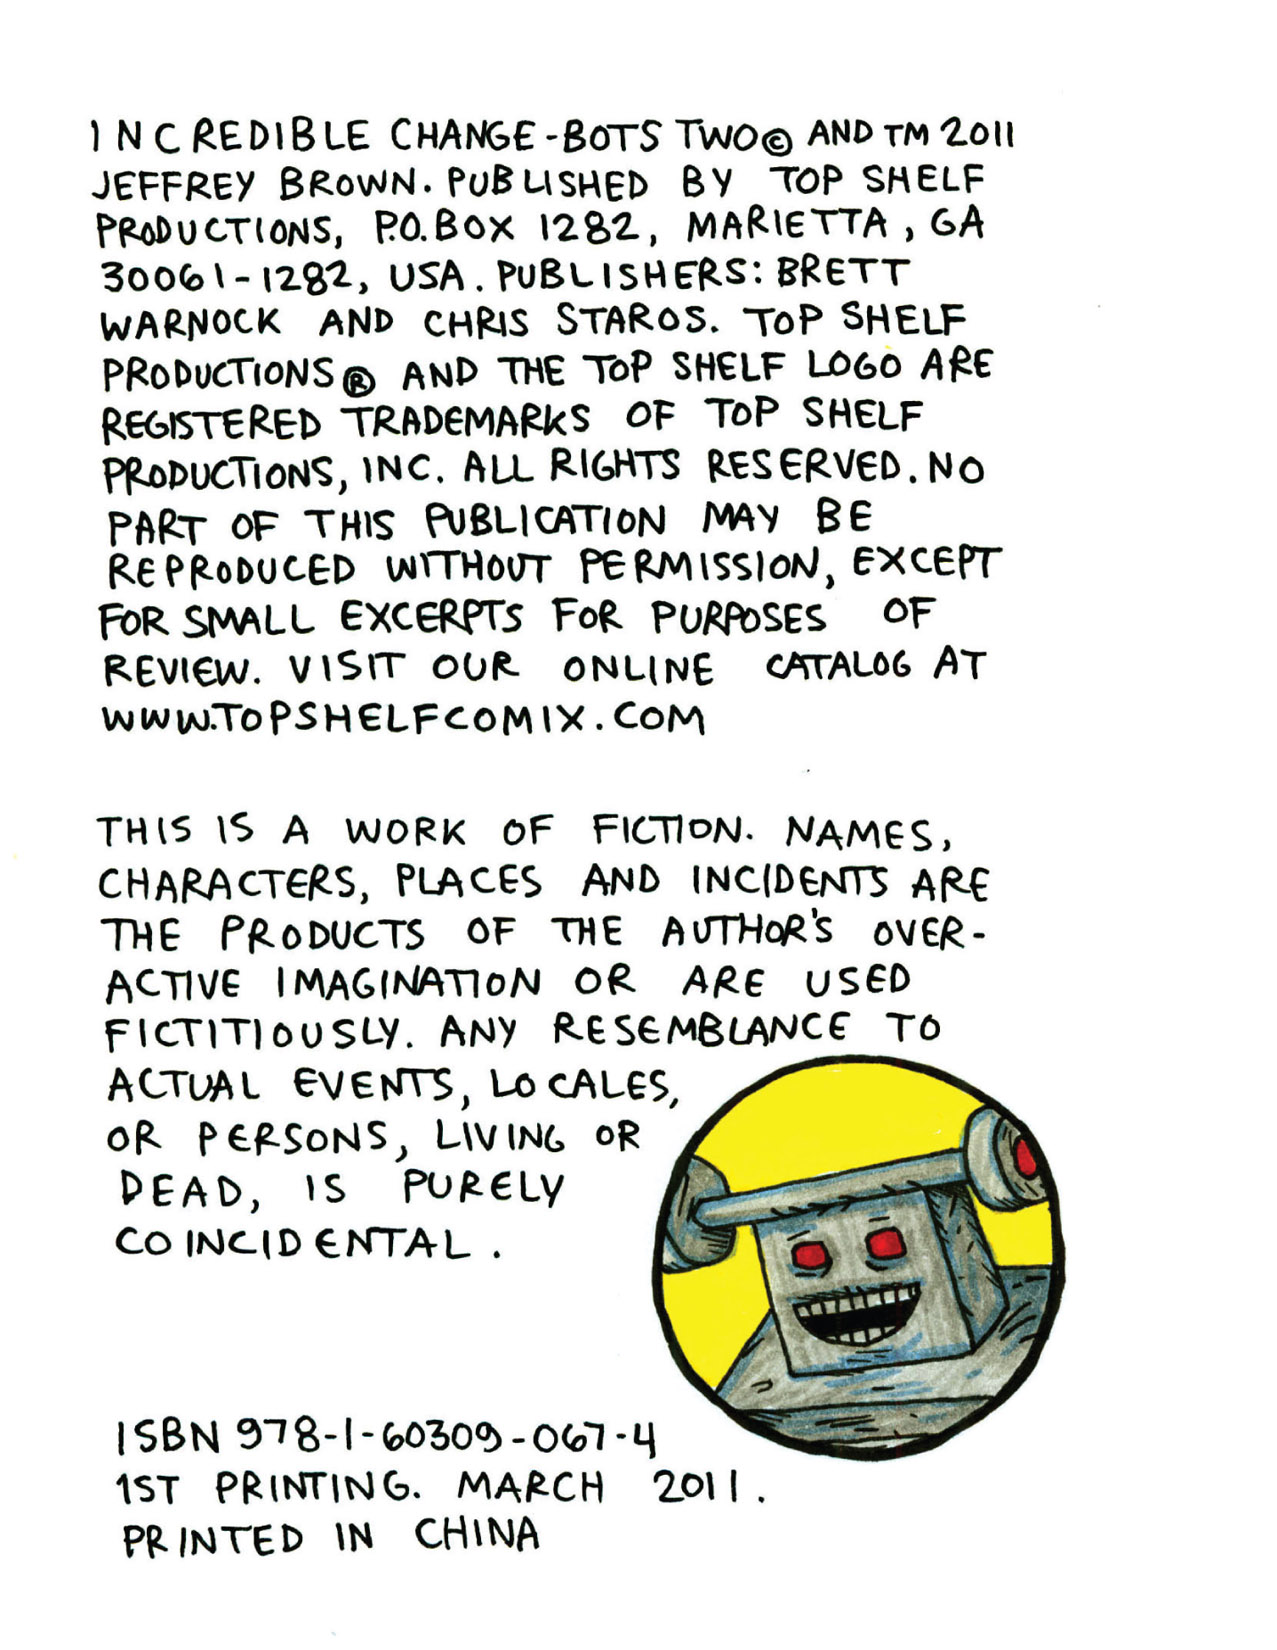 Read online Incredible Change-Bots comic -  Issue # TPB 2 - 5